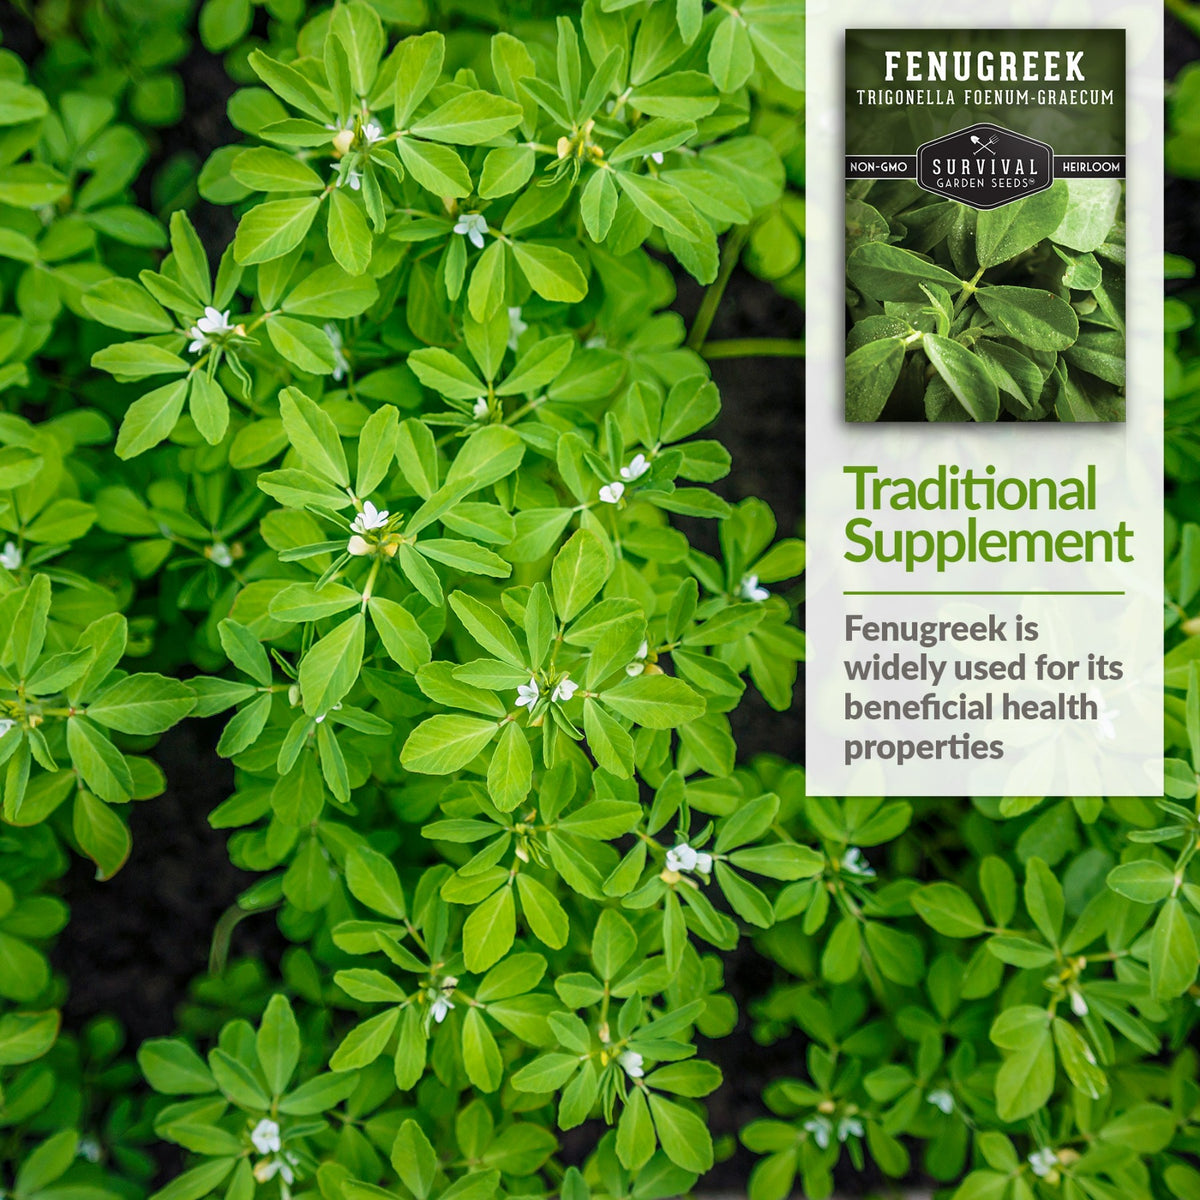 Fenugreek is widely used for its beneficial health properties